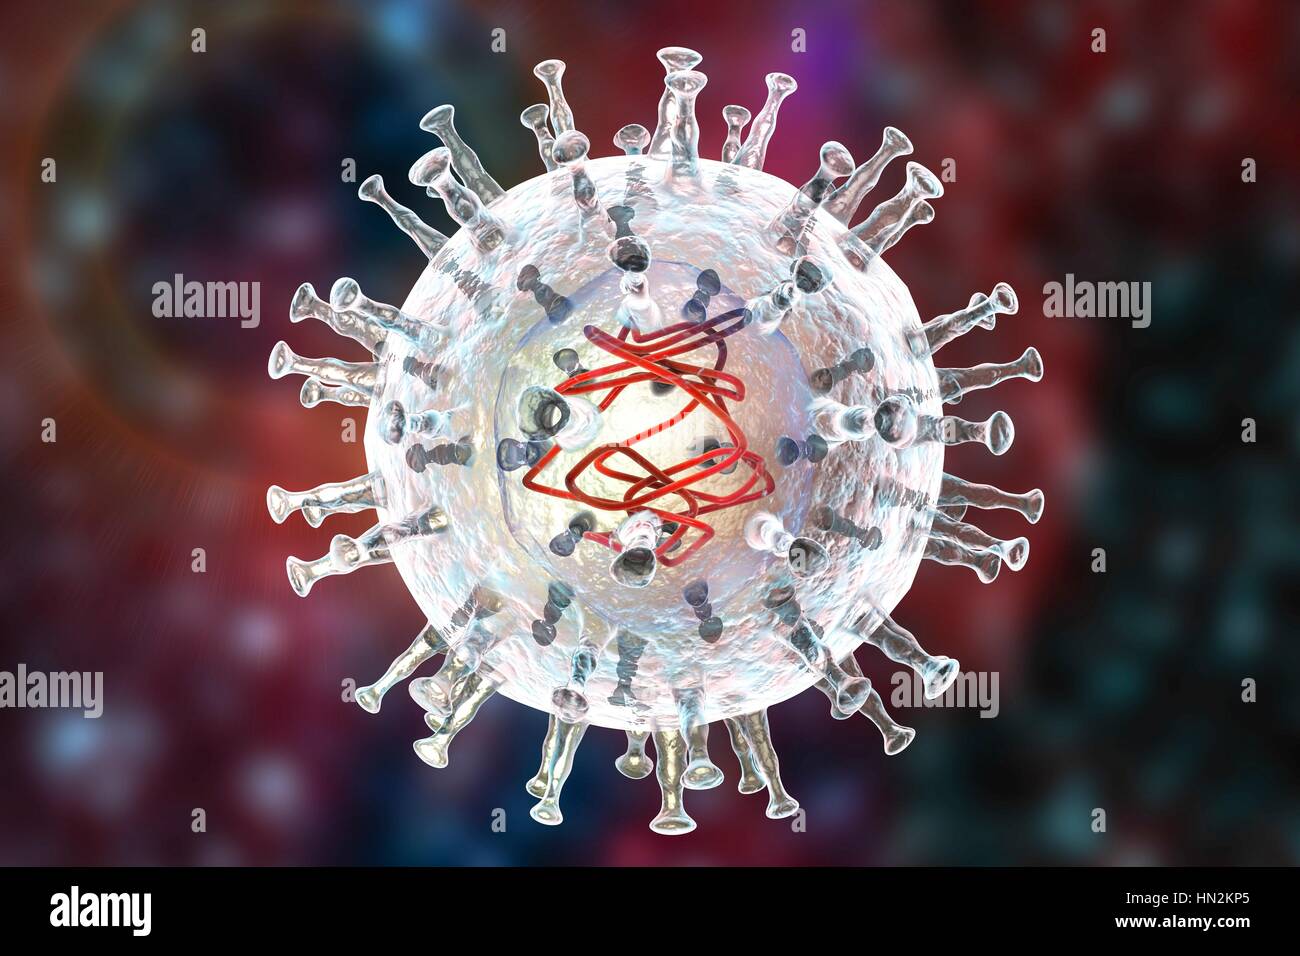 African swine fever virus, illustration. This virus is a member of the iridovirus group that causes African swine fever. Unlike other DNA- containing vertebrate viruses (except the poxviruses), the iridovirus replicates in the host cell's cytoplasm (most others replicate in the nucleus). Stock Photo